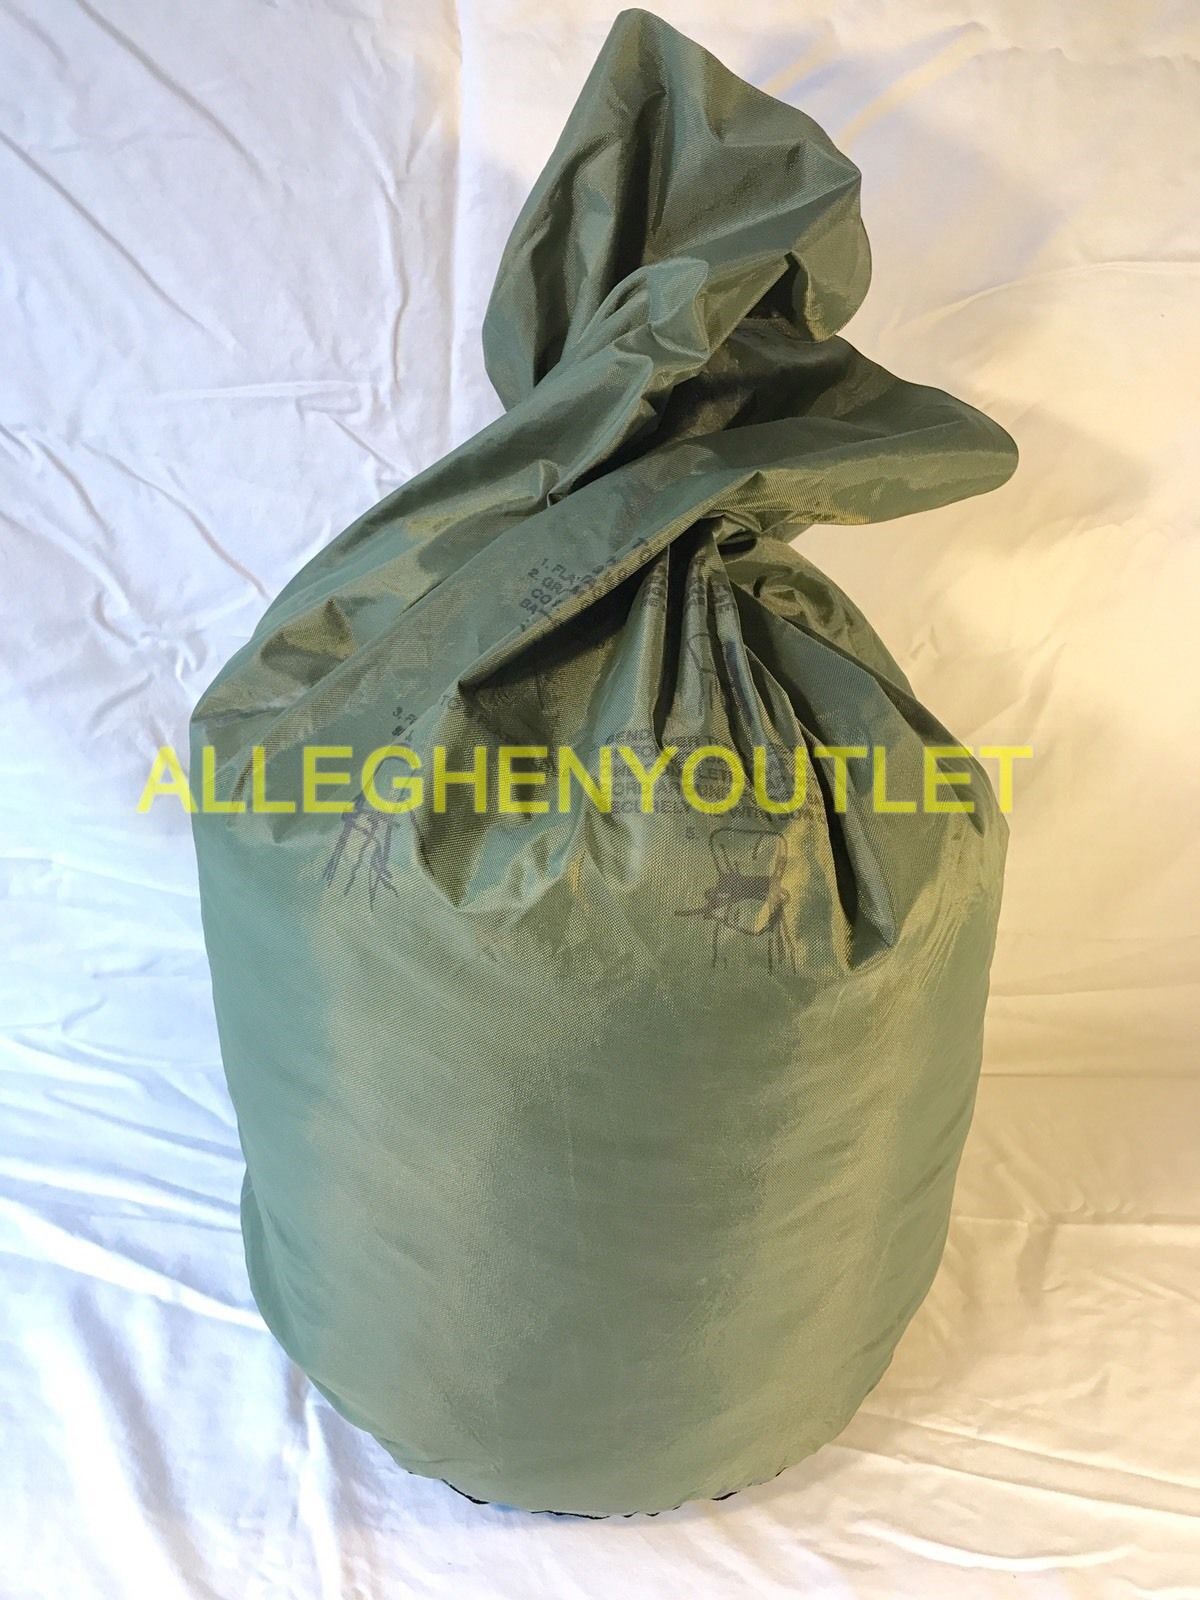 US Army Military WATERPROOF CLOTHES Clothing GEAR WET WEATHER LAUNDRY BAG GC